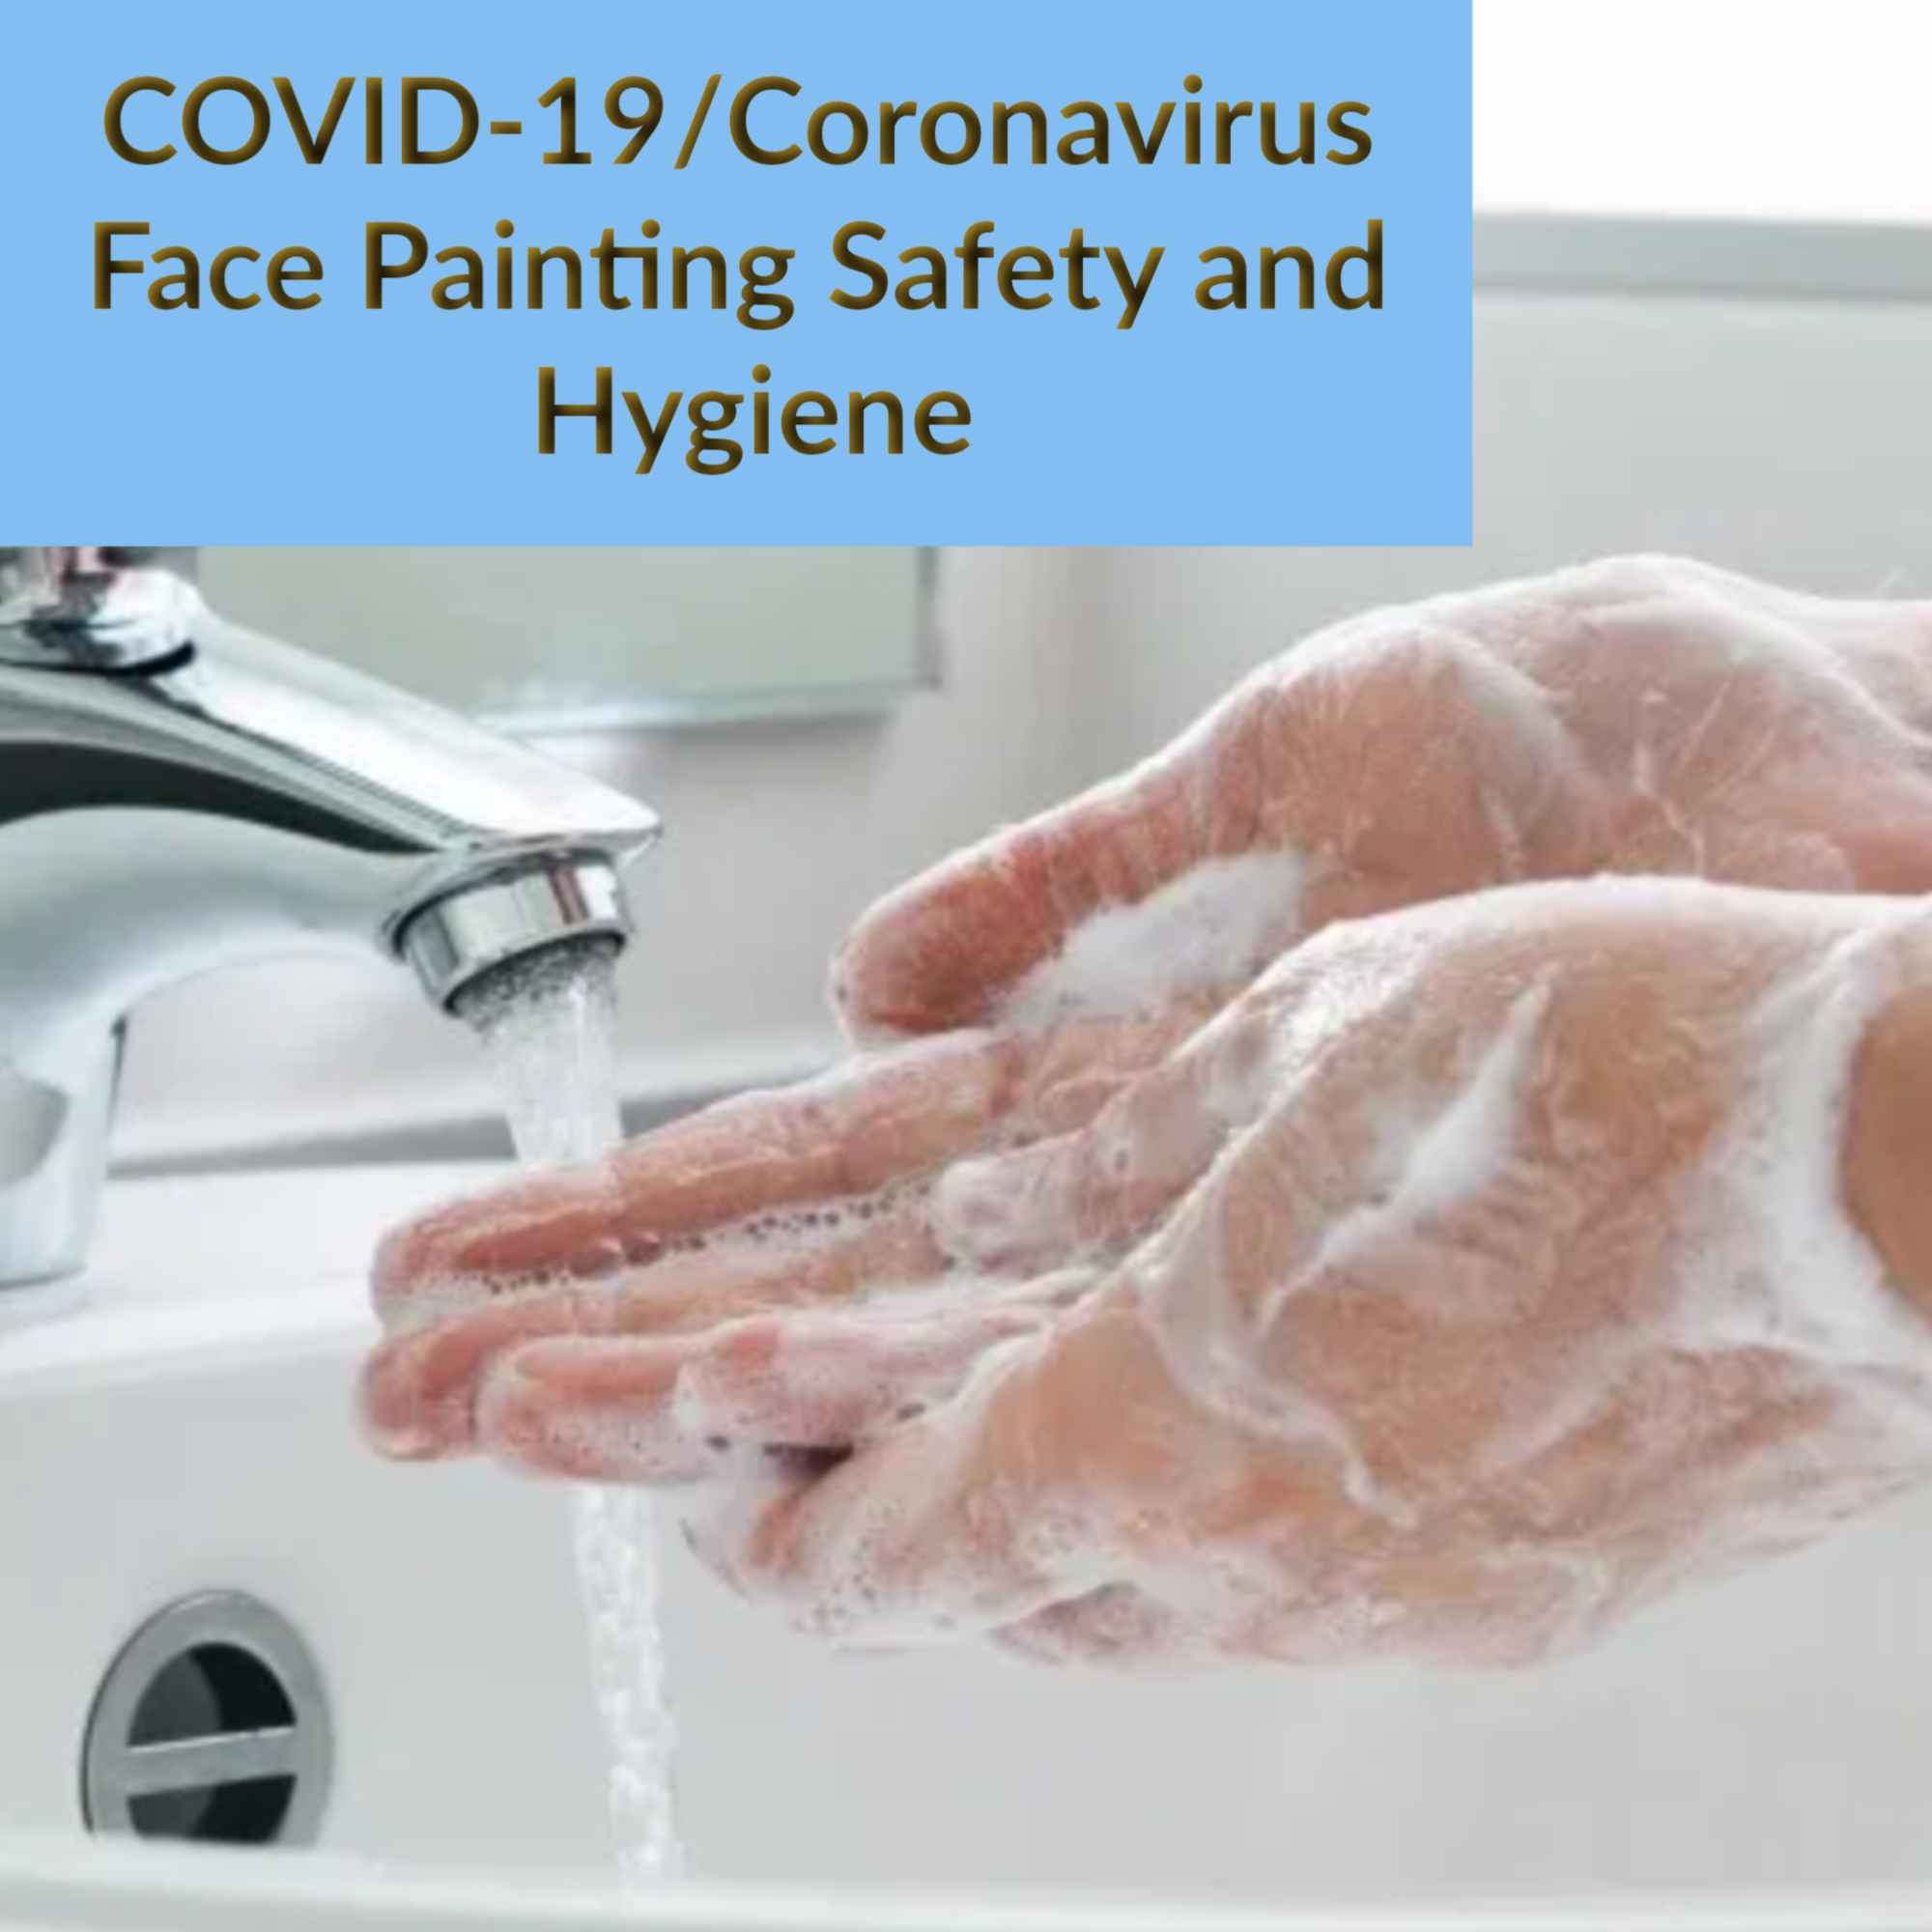 COVID-19/Coronavirus Face Painting Safety and Hygiene